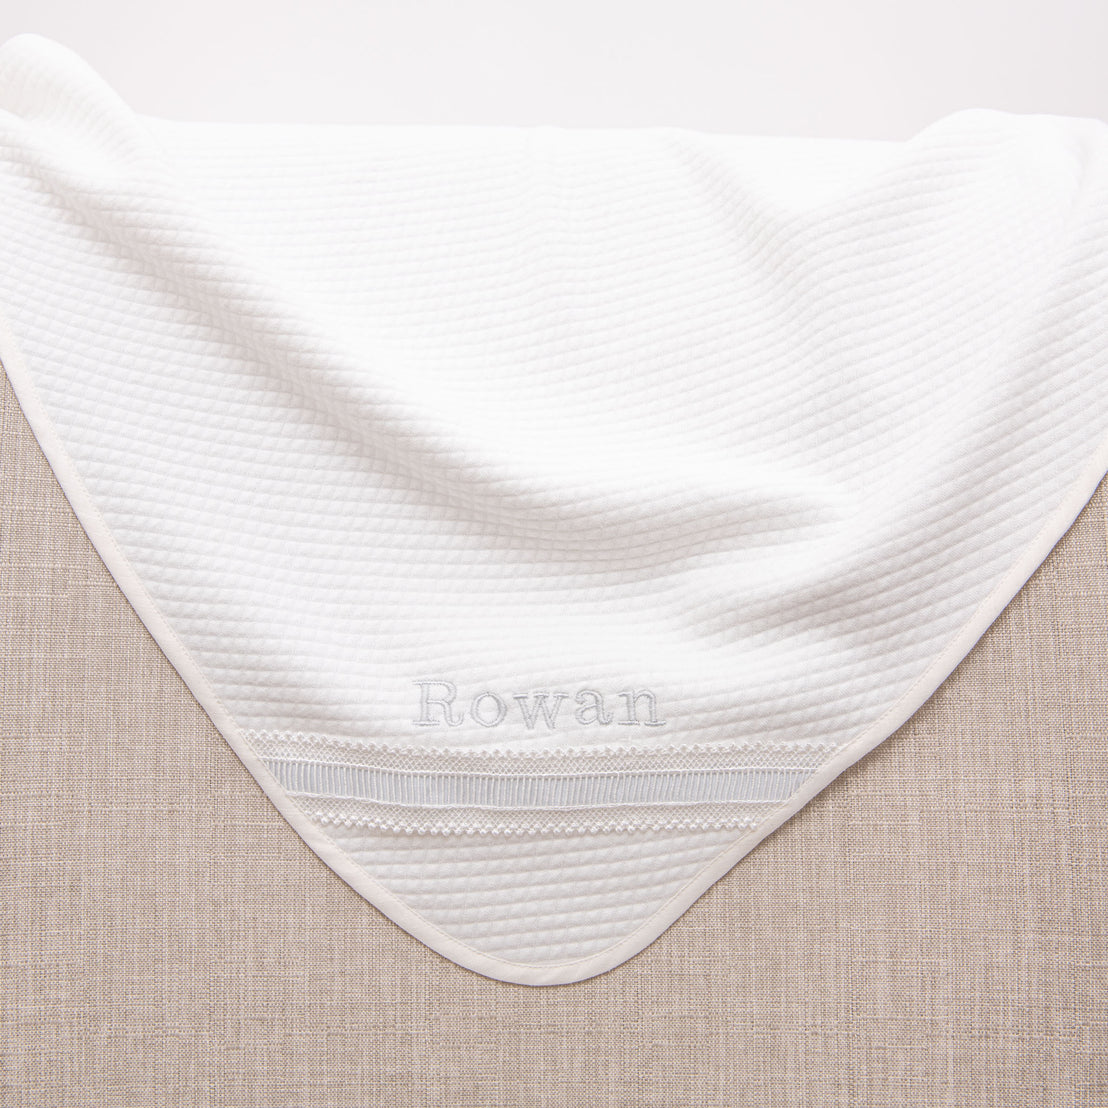 A personalized baby boy blanket embroidered with the name Rowan. Blanket is draped on the edge of a chair.